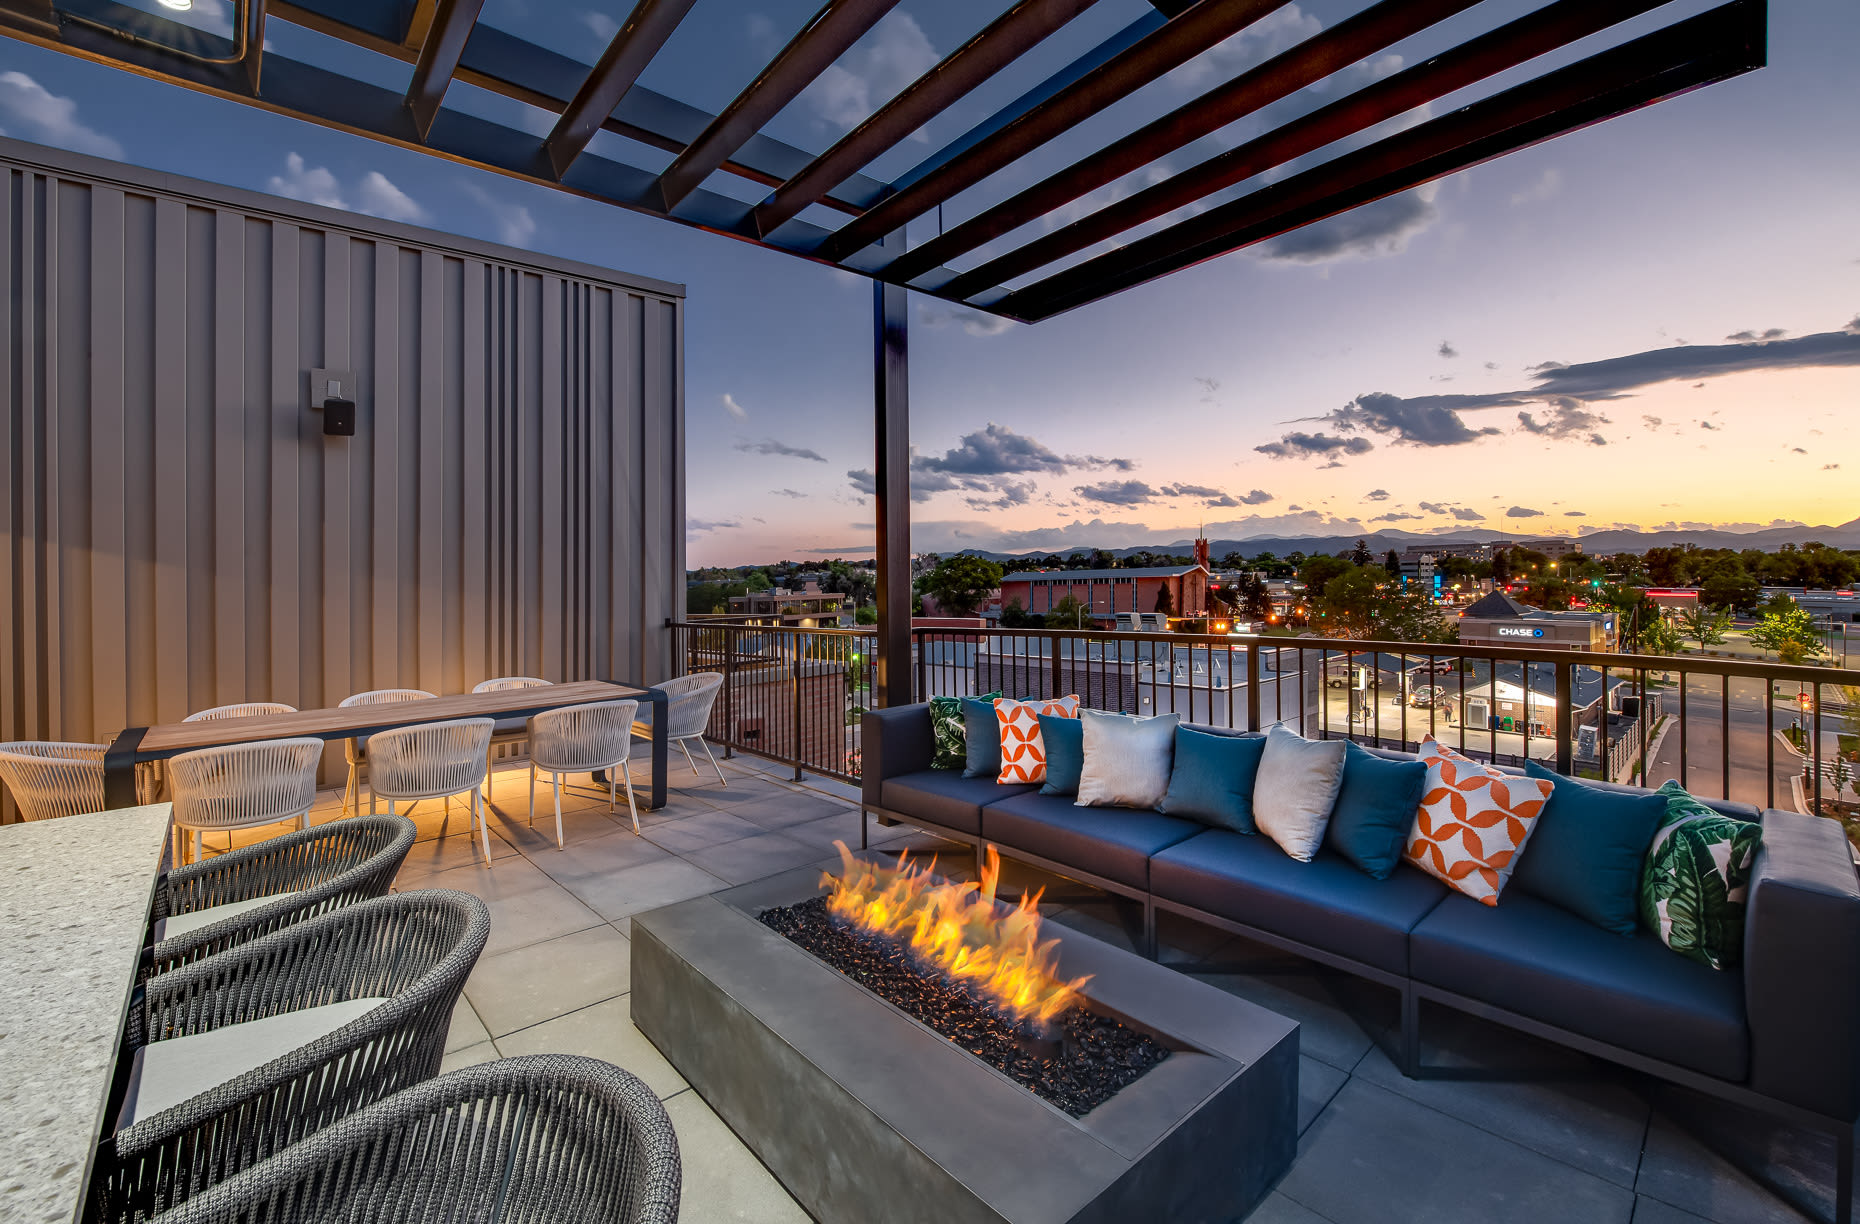 Cozy firepit at night with a wonderful view at West 38 in Wheat Ridge, Colorado